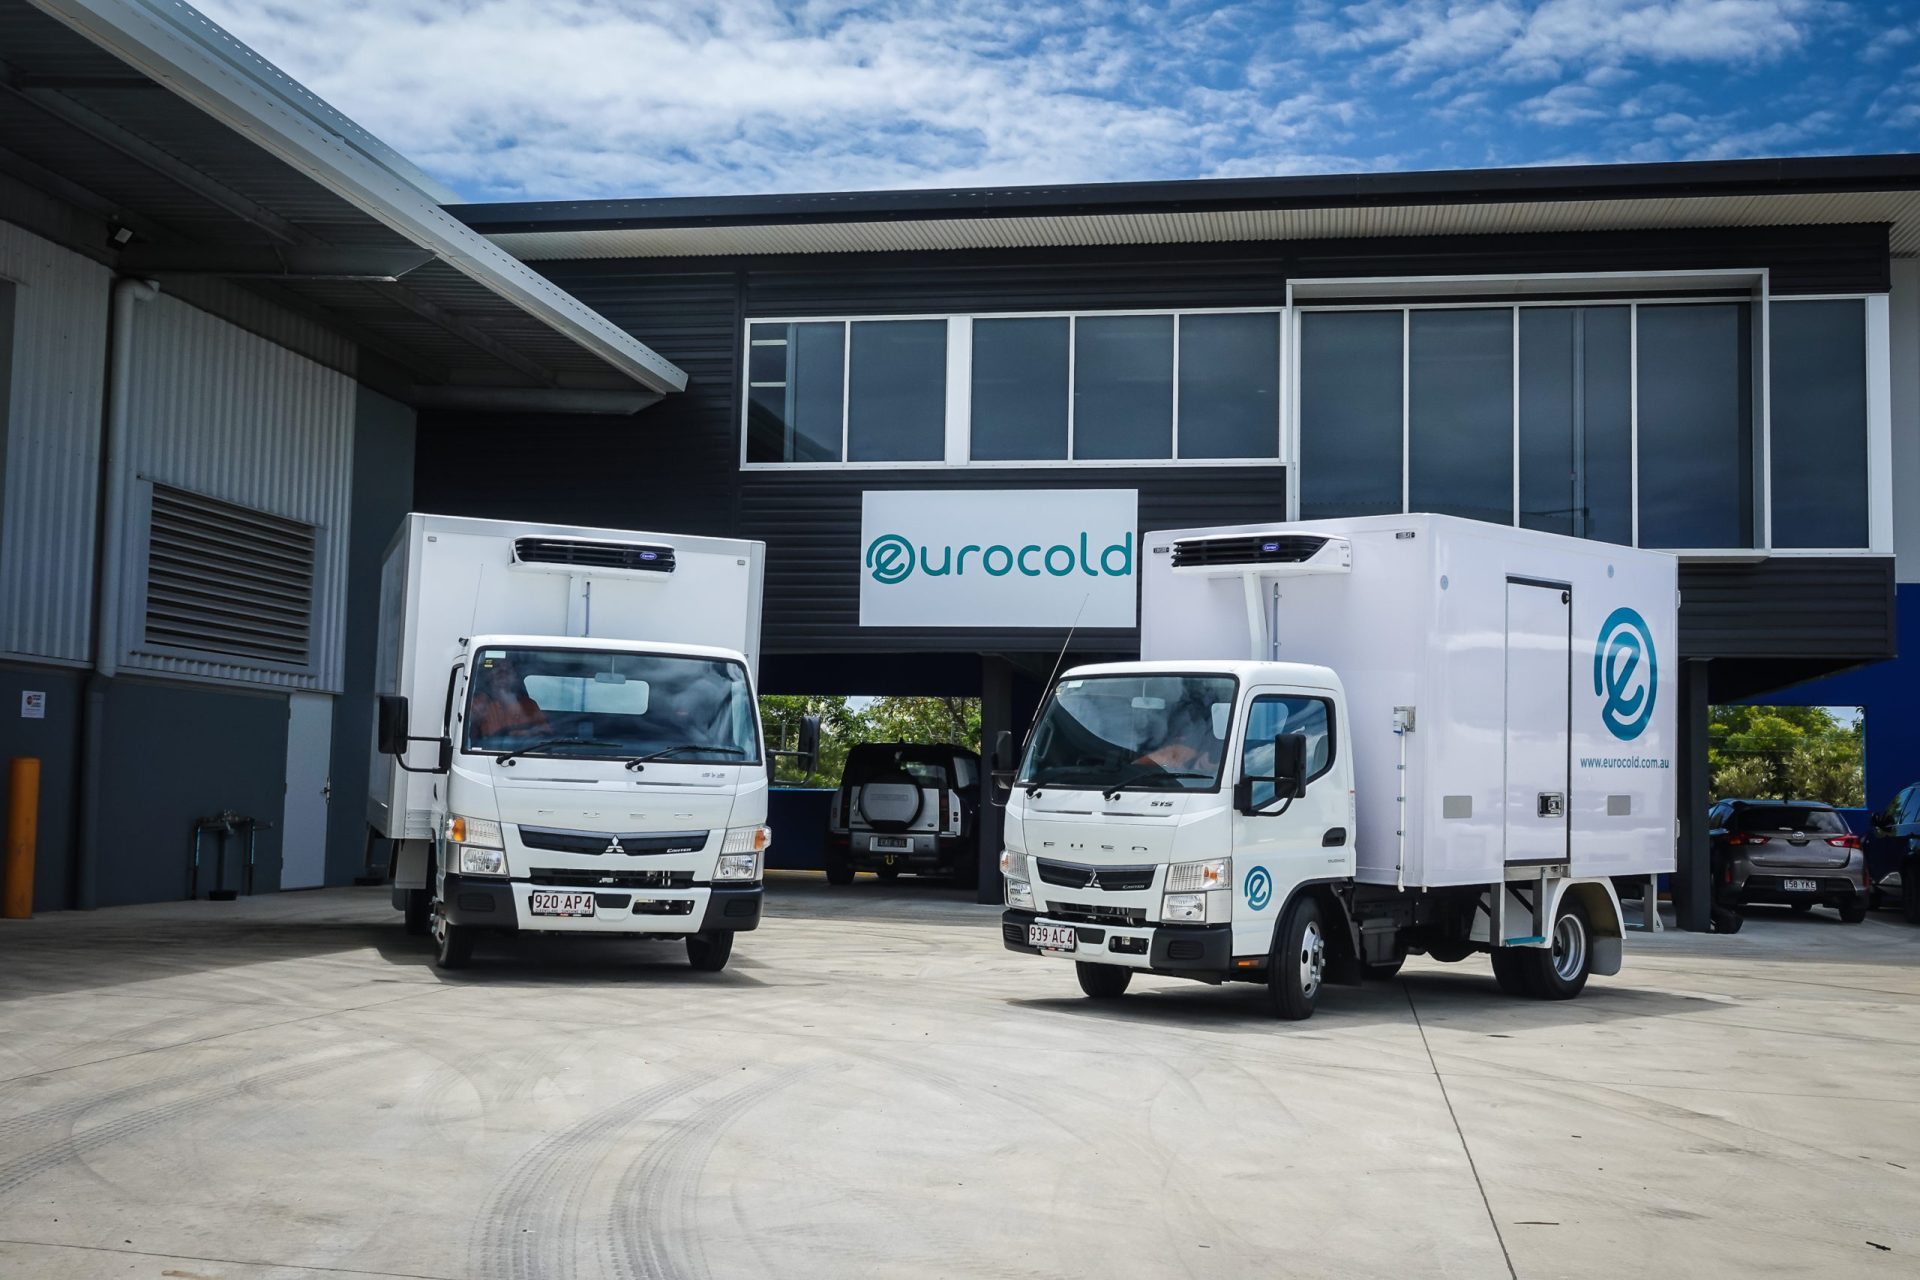 Eurocold 4 pallet refrigerated trucks with Fuso chassis and Carrier fridges